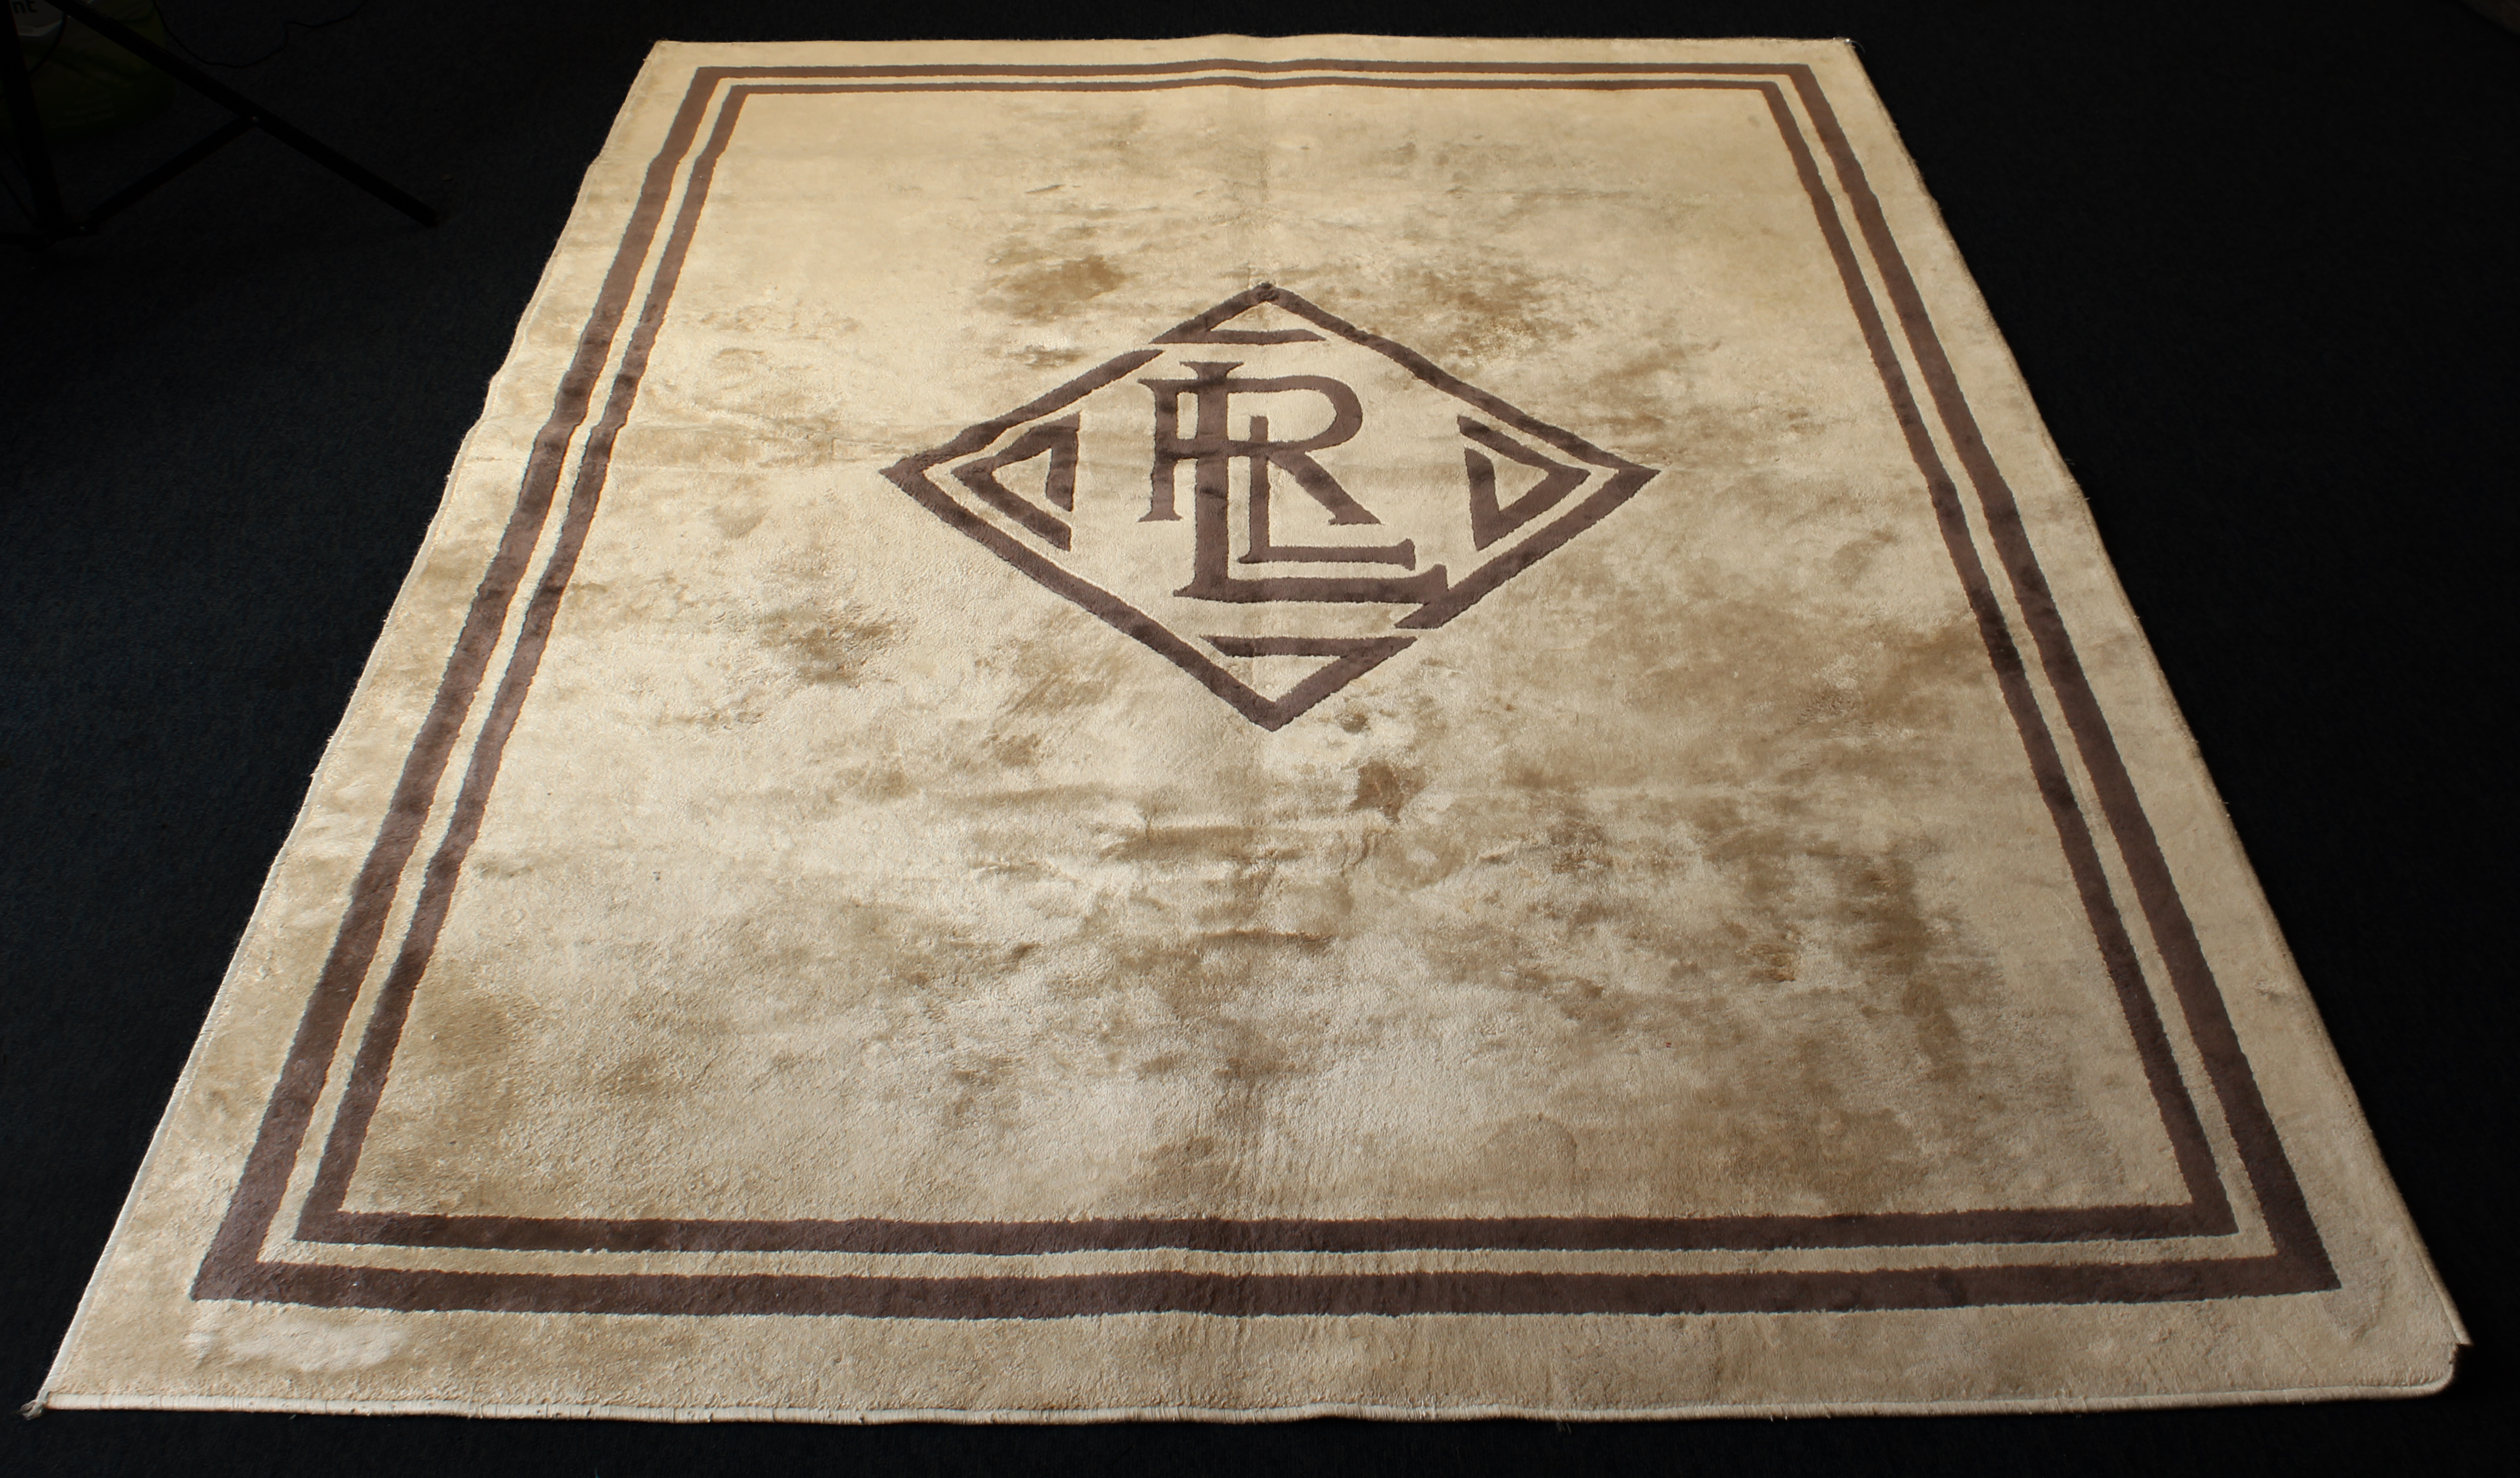 A Ralph Lauren monogram rug - probably silk and wool, original RL label to border, in chocolate